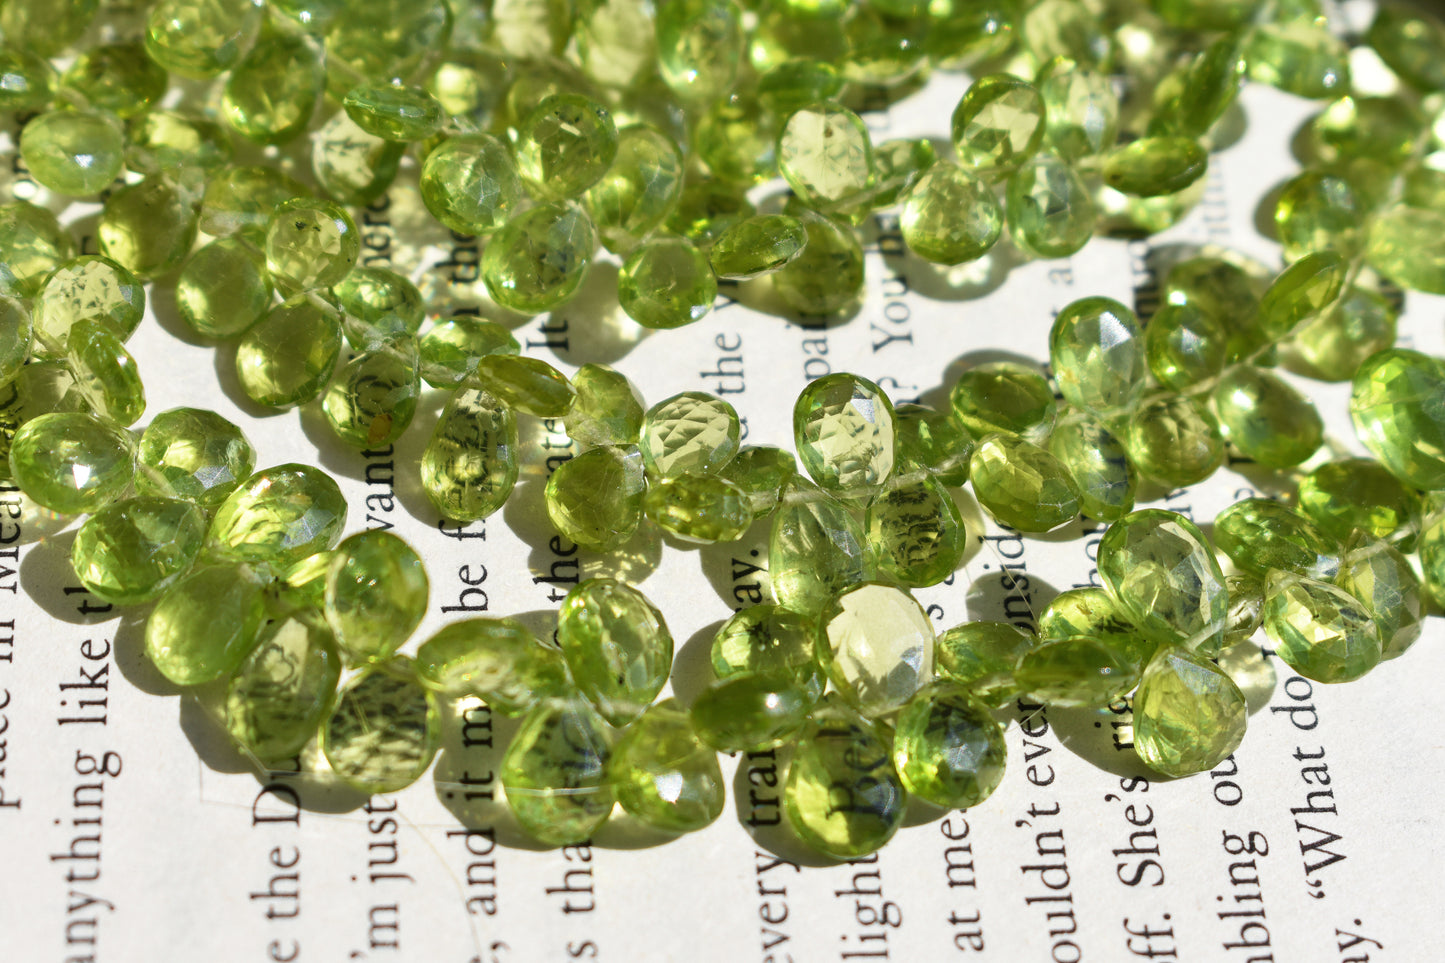 Peridot Faceted Pear Beads 5-6mm